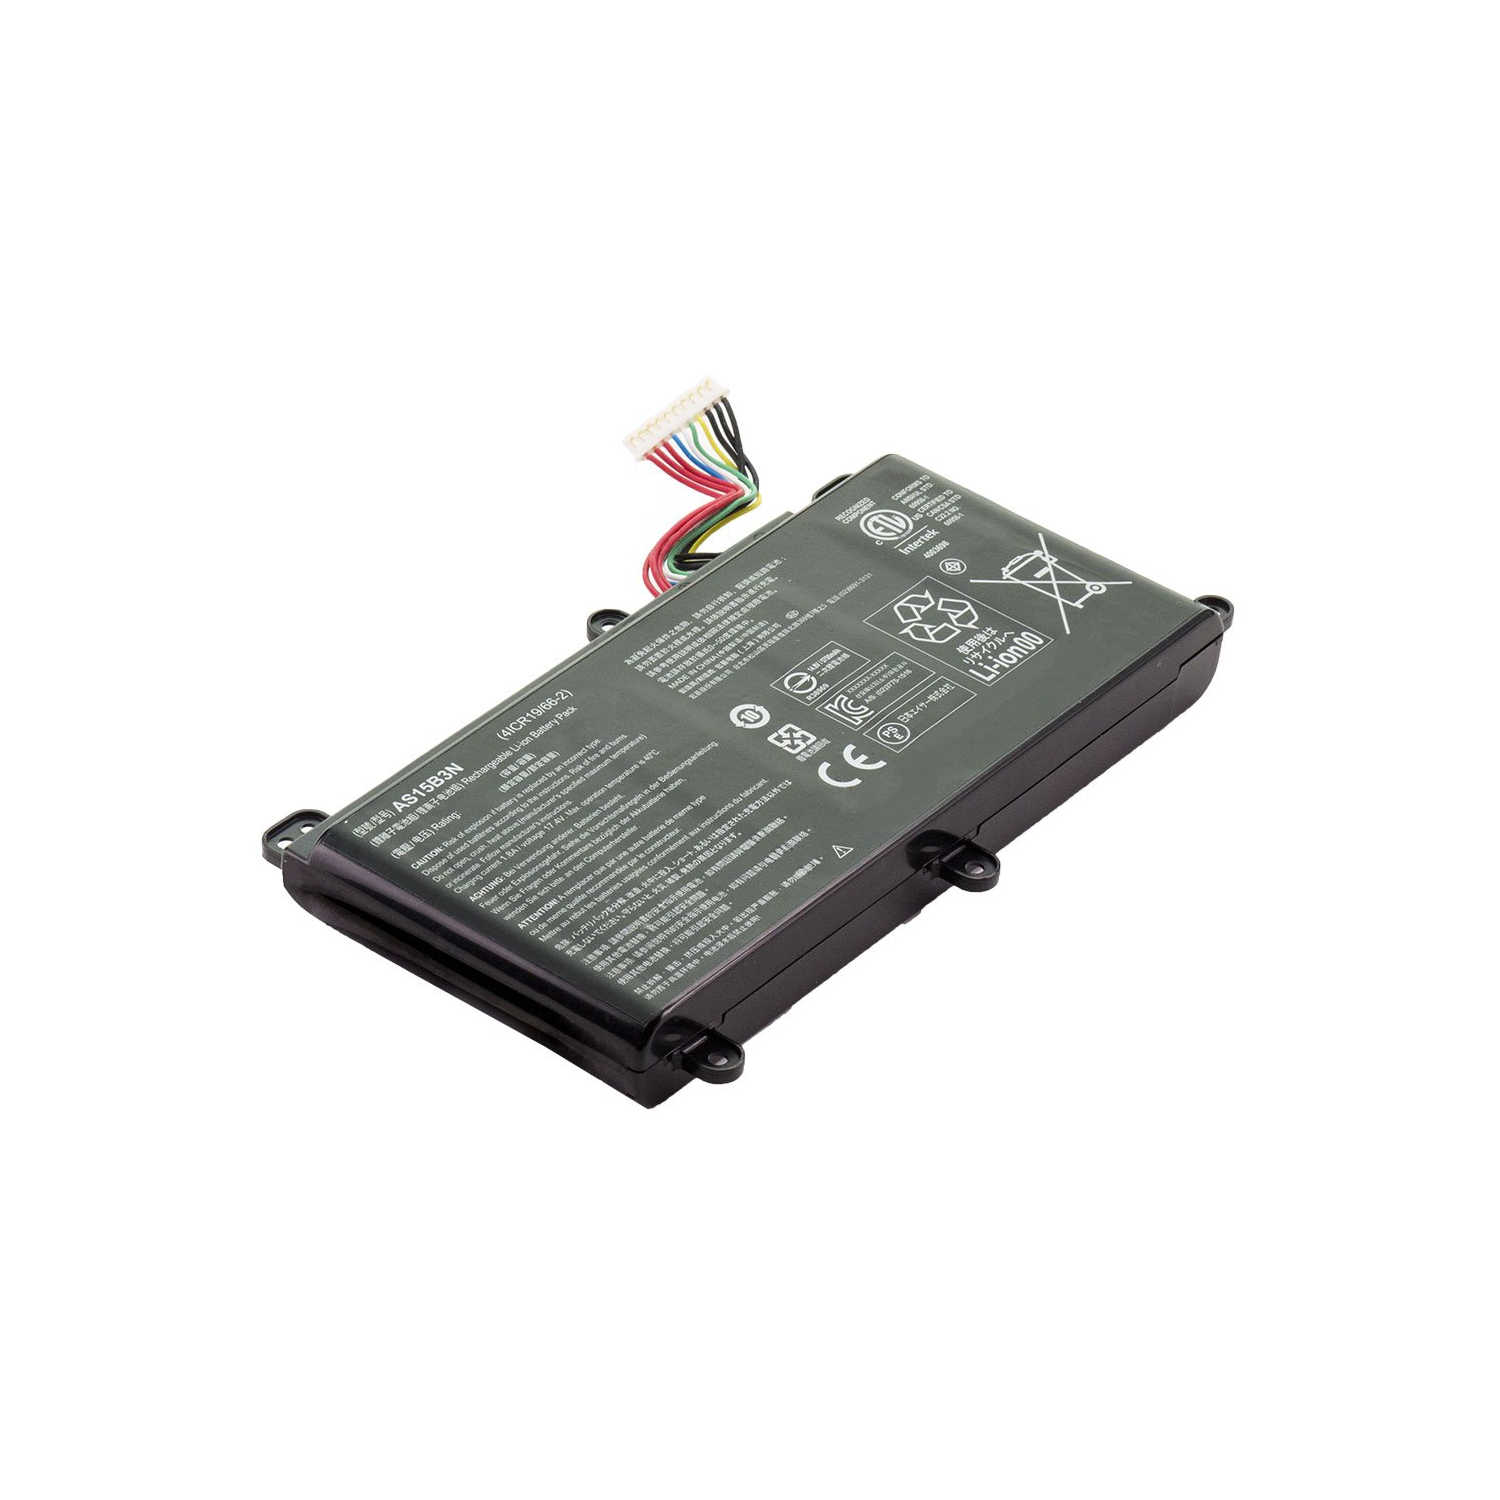 Laptop Battery Replacement for Acer Predator 17 G9-793-73MB, AS15B3N, KT.00803.004, KT.00803.005